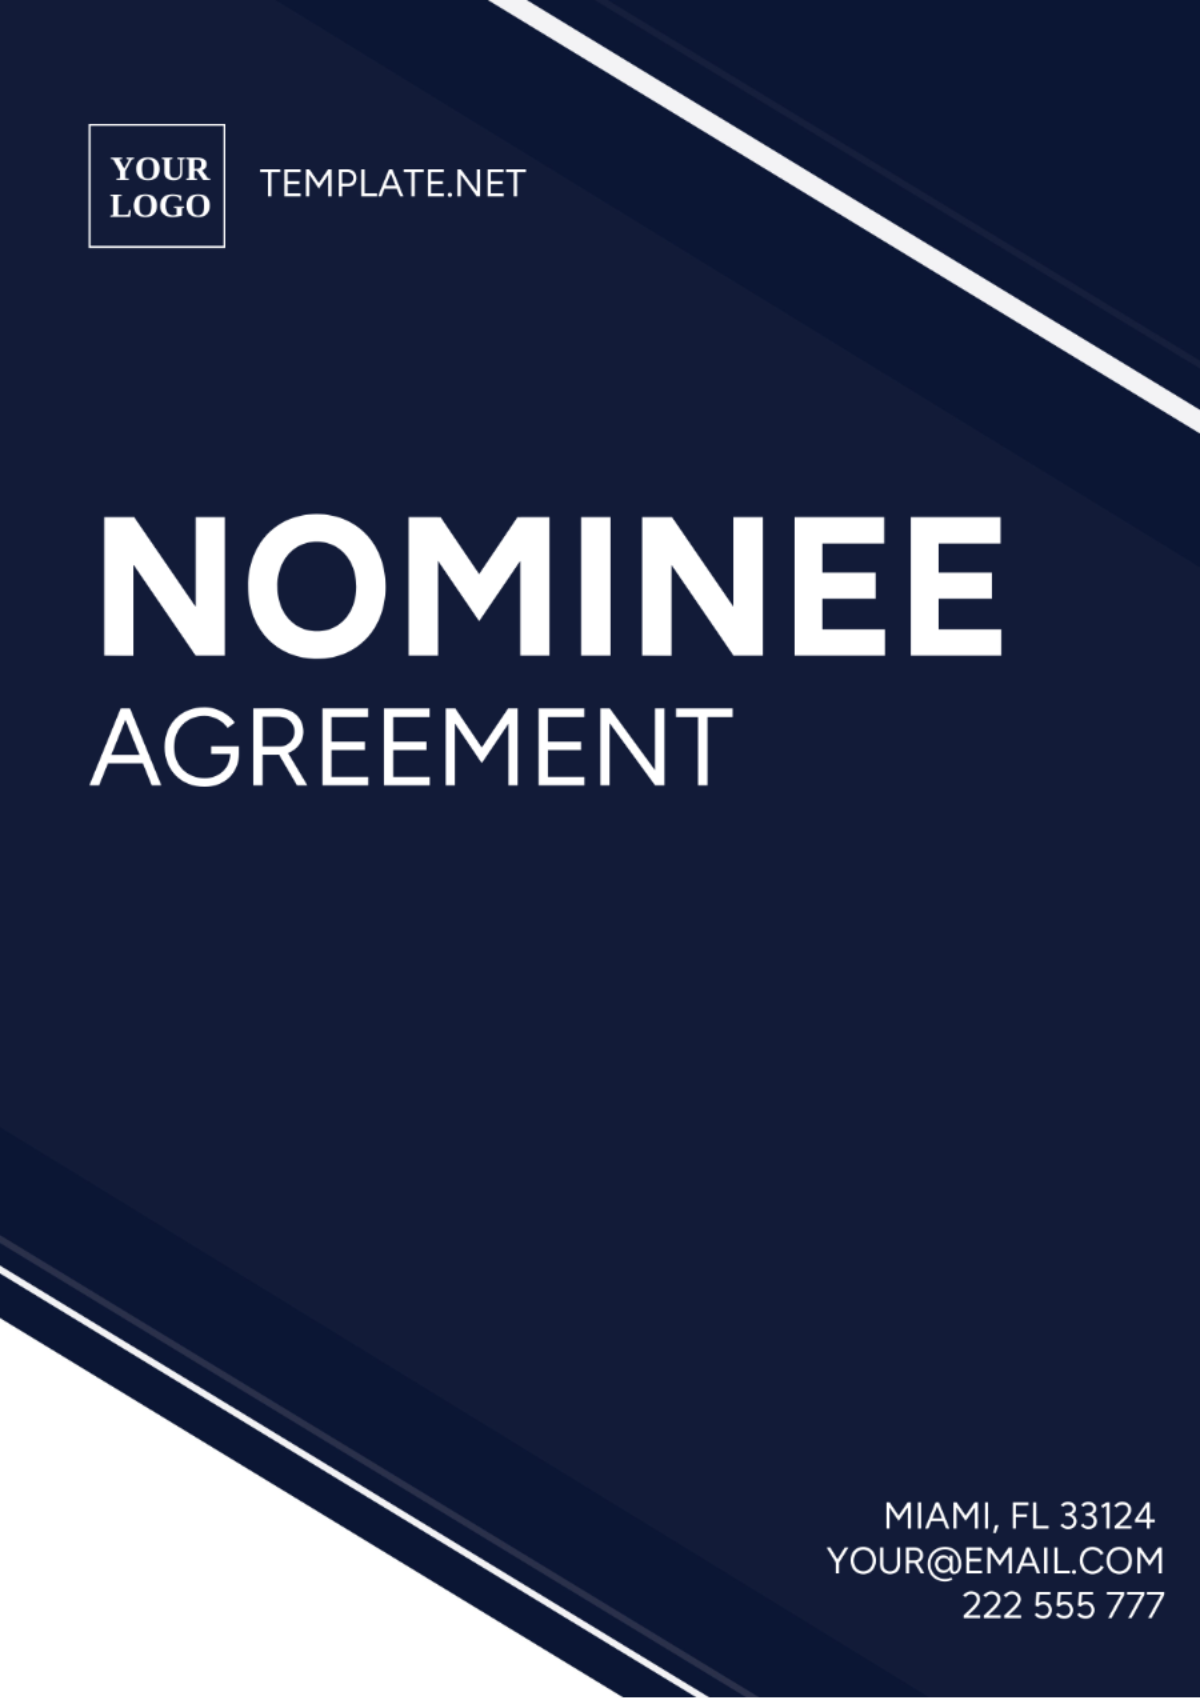 Nominee Agreement Template